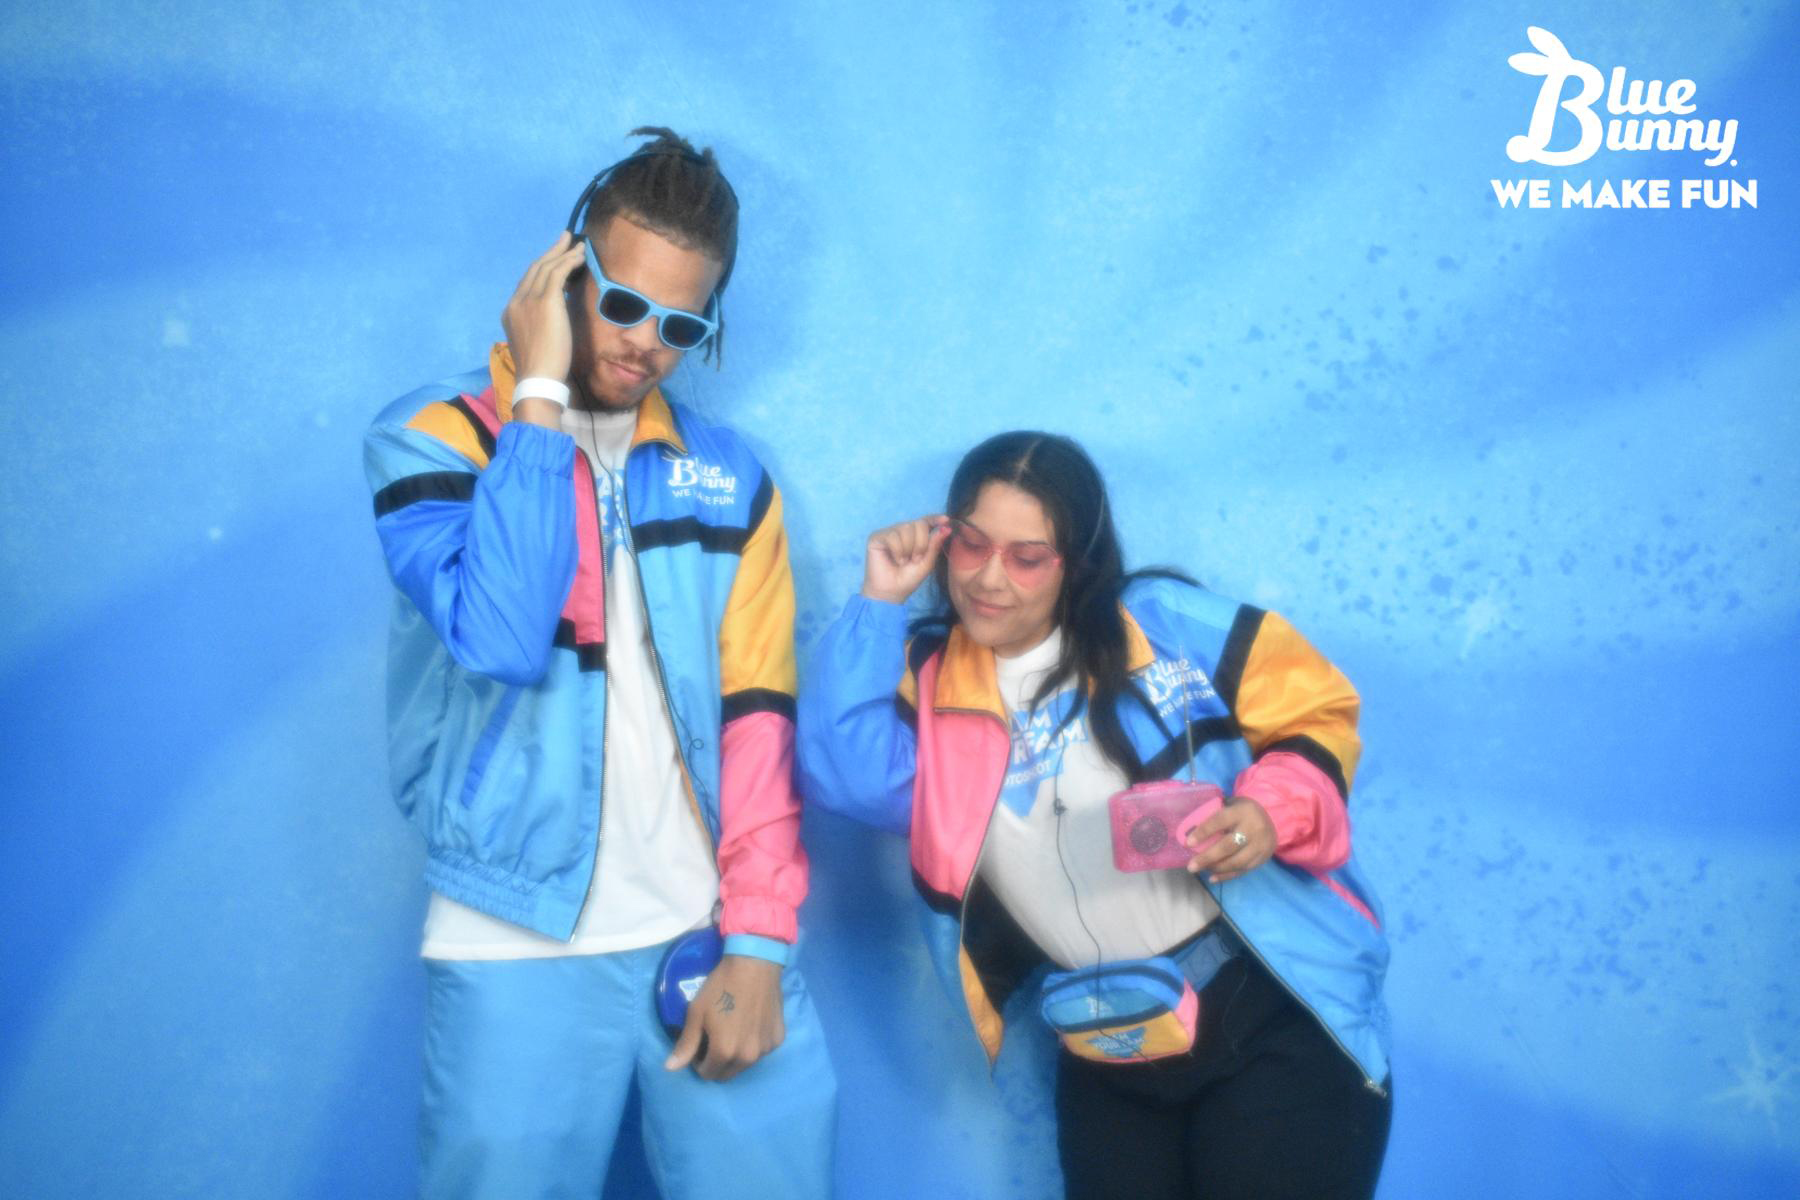 Man and woman in a sweatsuit wearing sunglasses pretending to be DJs